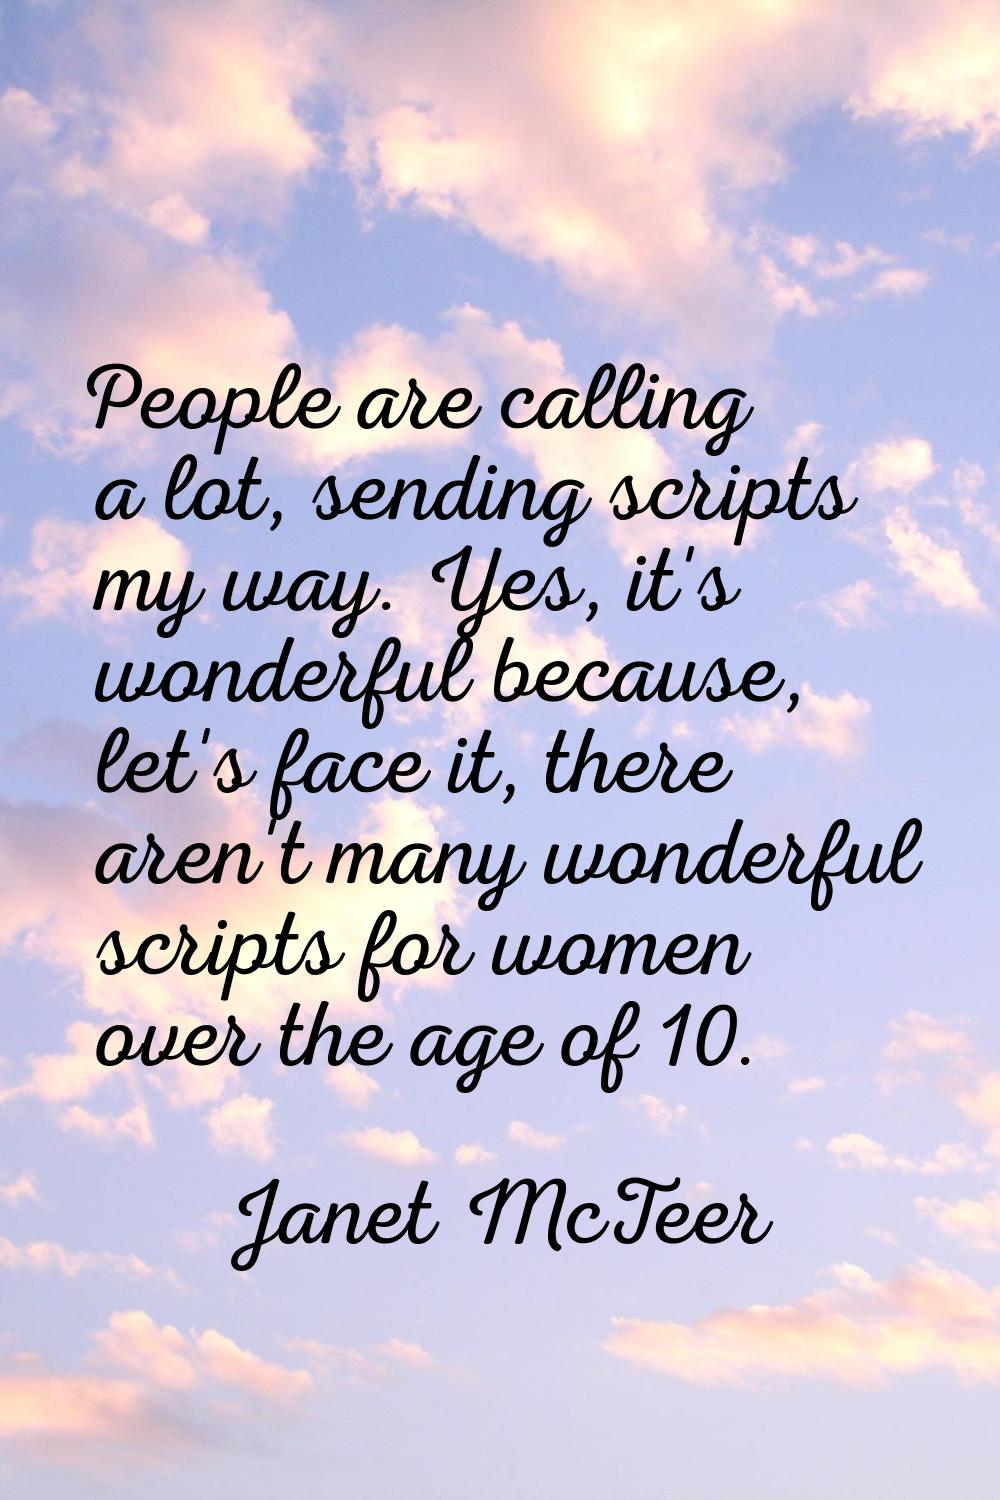 People are calling a lot, sending scripts my way. Yes, it's wonderful because, let's face it, there